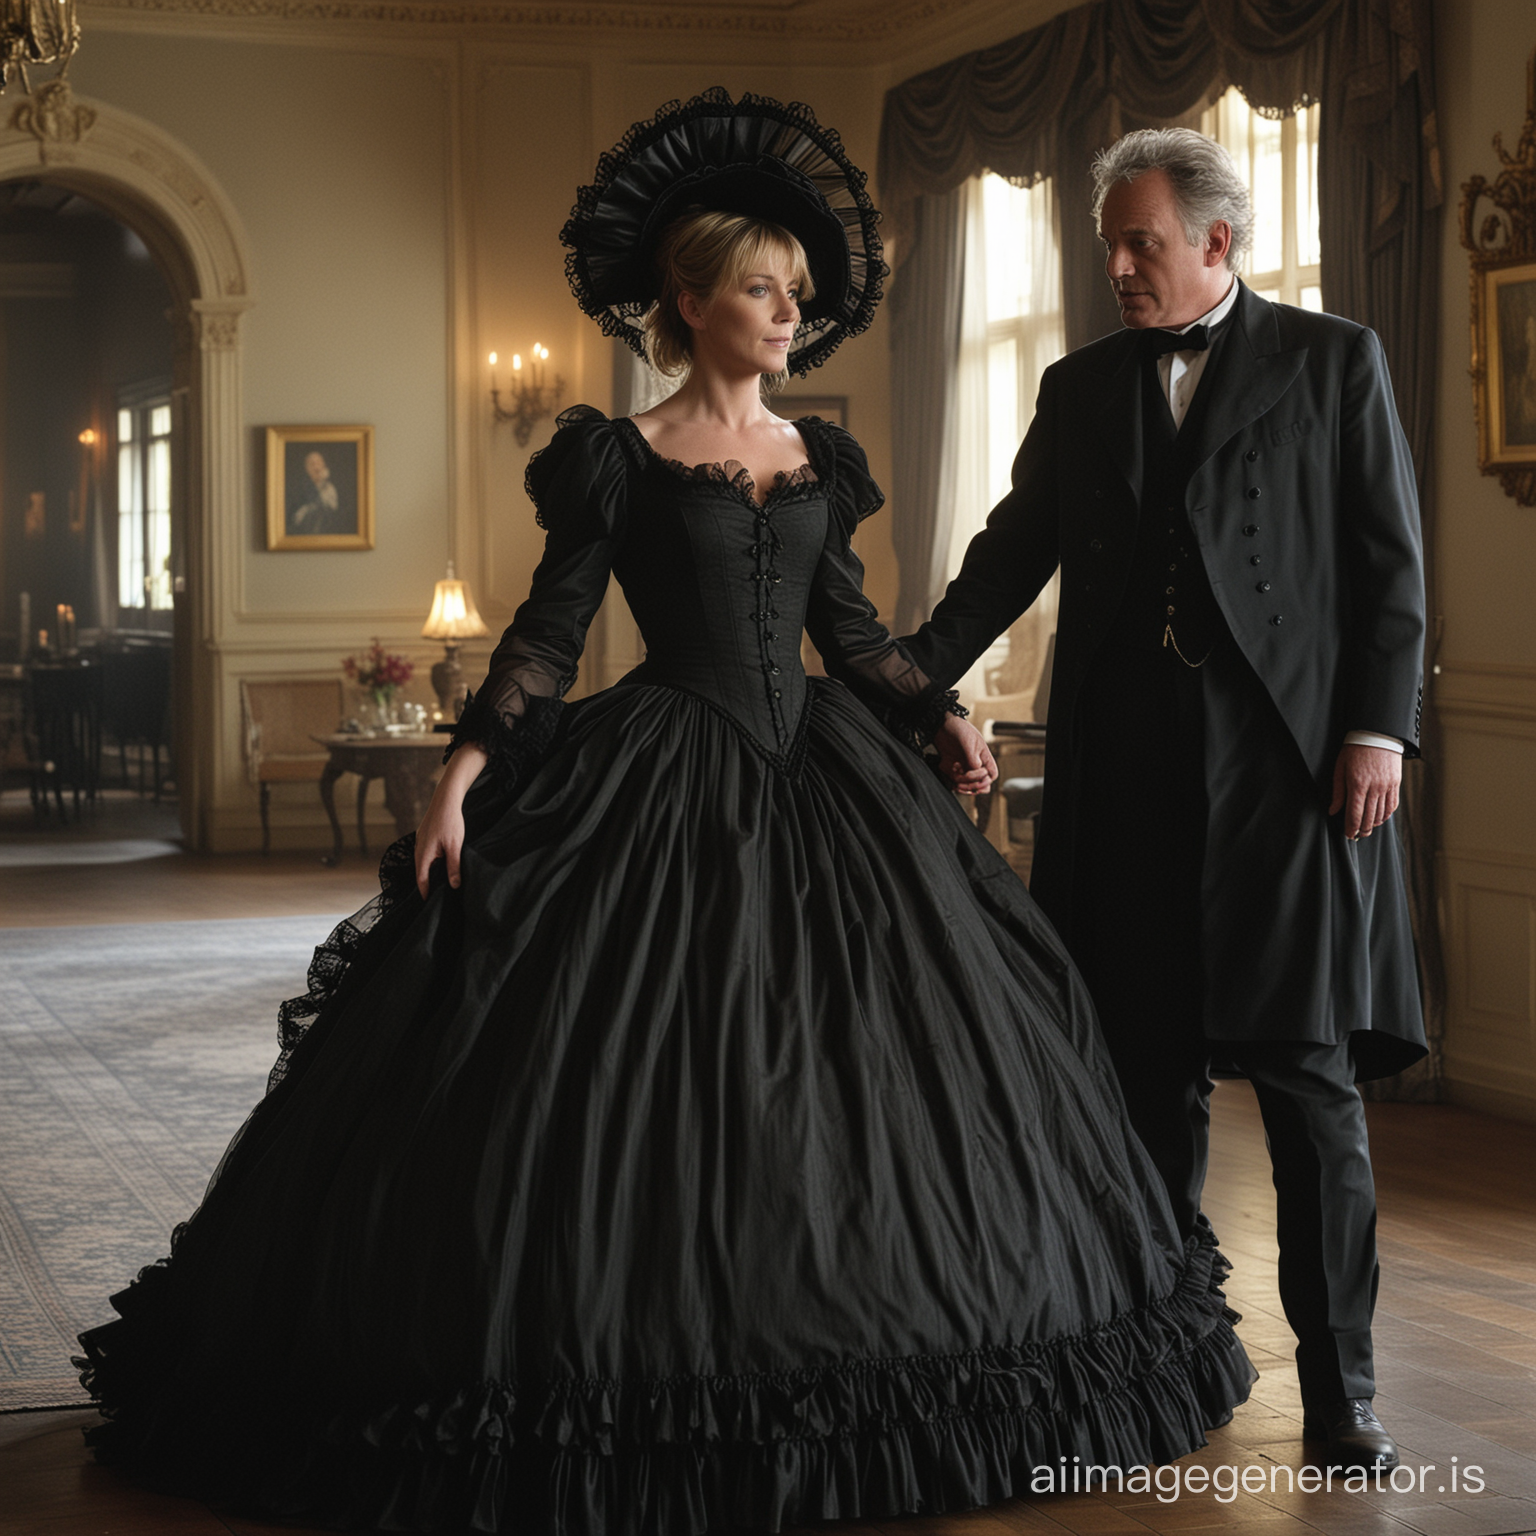 Amanda Tapping as Major Samantha Carter wearing a black floor-length loose billowing 1860 Victorian crinoline poofy dress with a frilly bonnet in a Victorian era mansion dancing with an old man dressed into a black Victorian suit who seems to be her newlywed husband